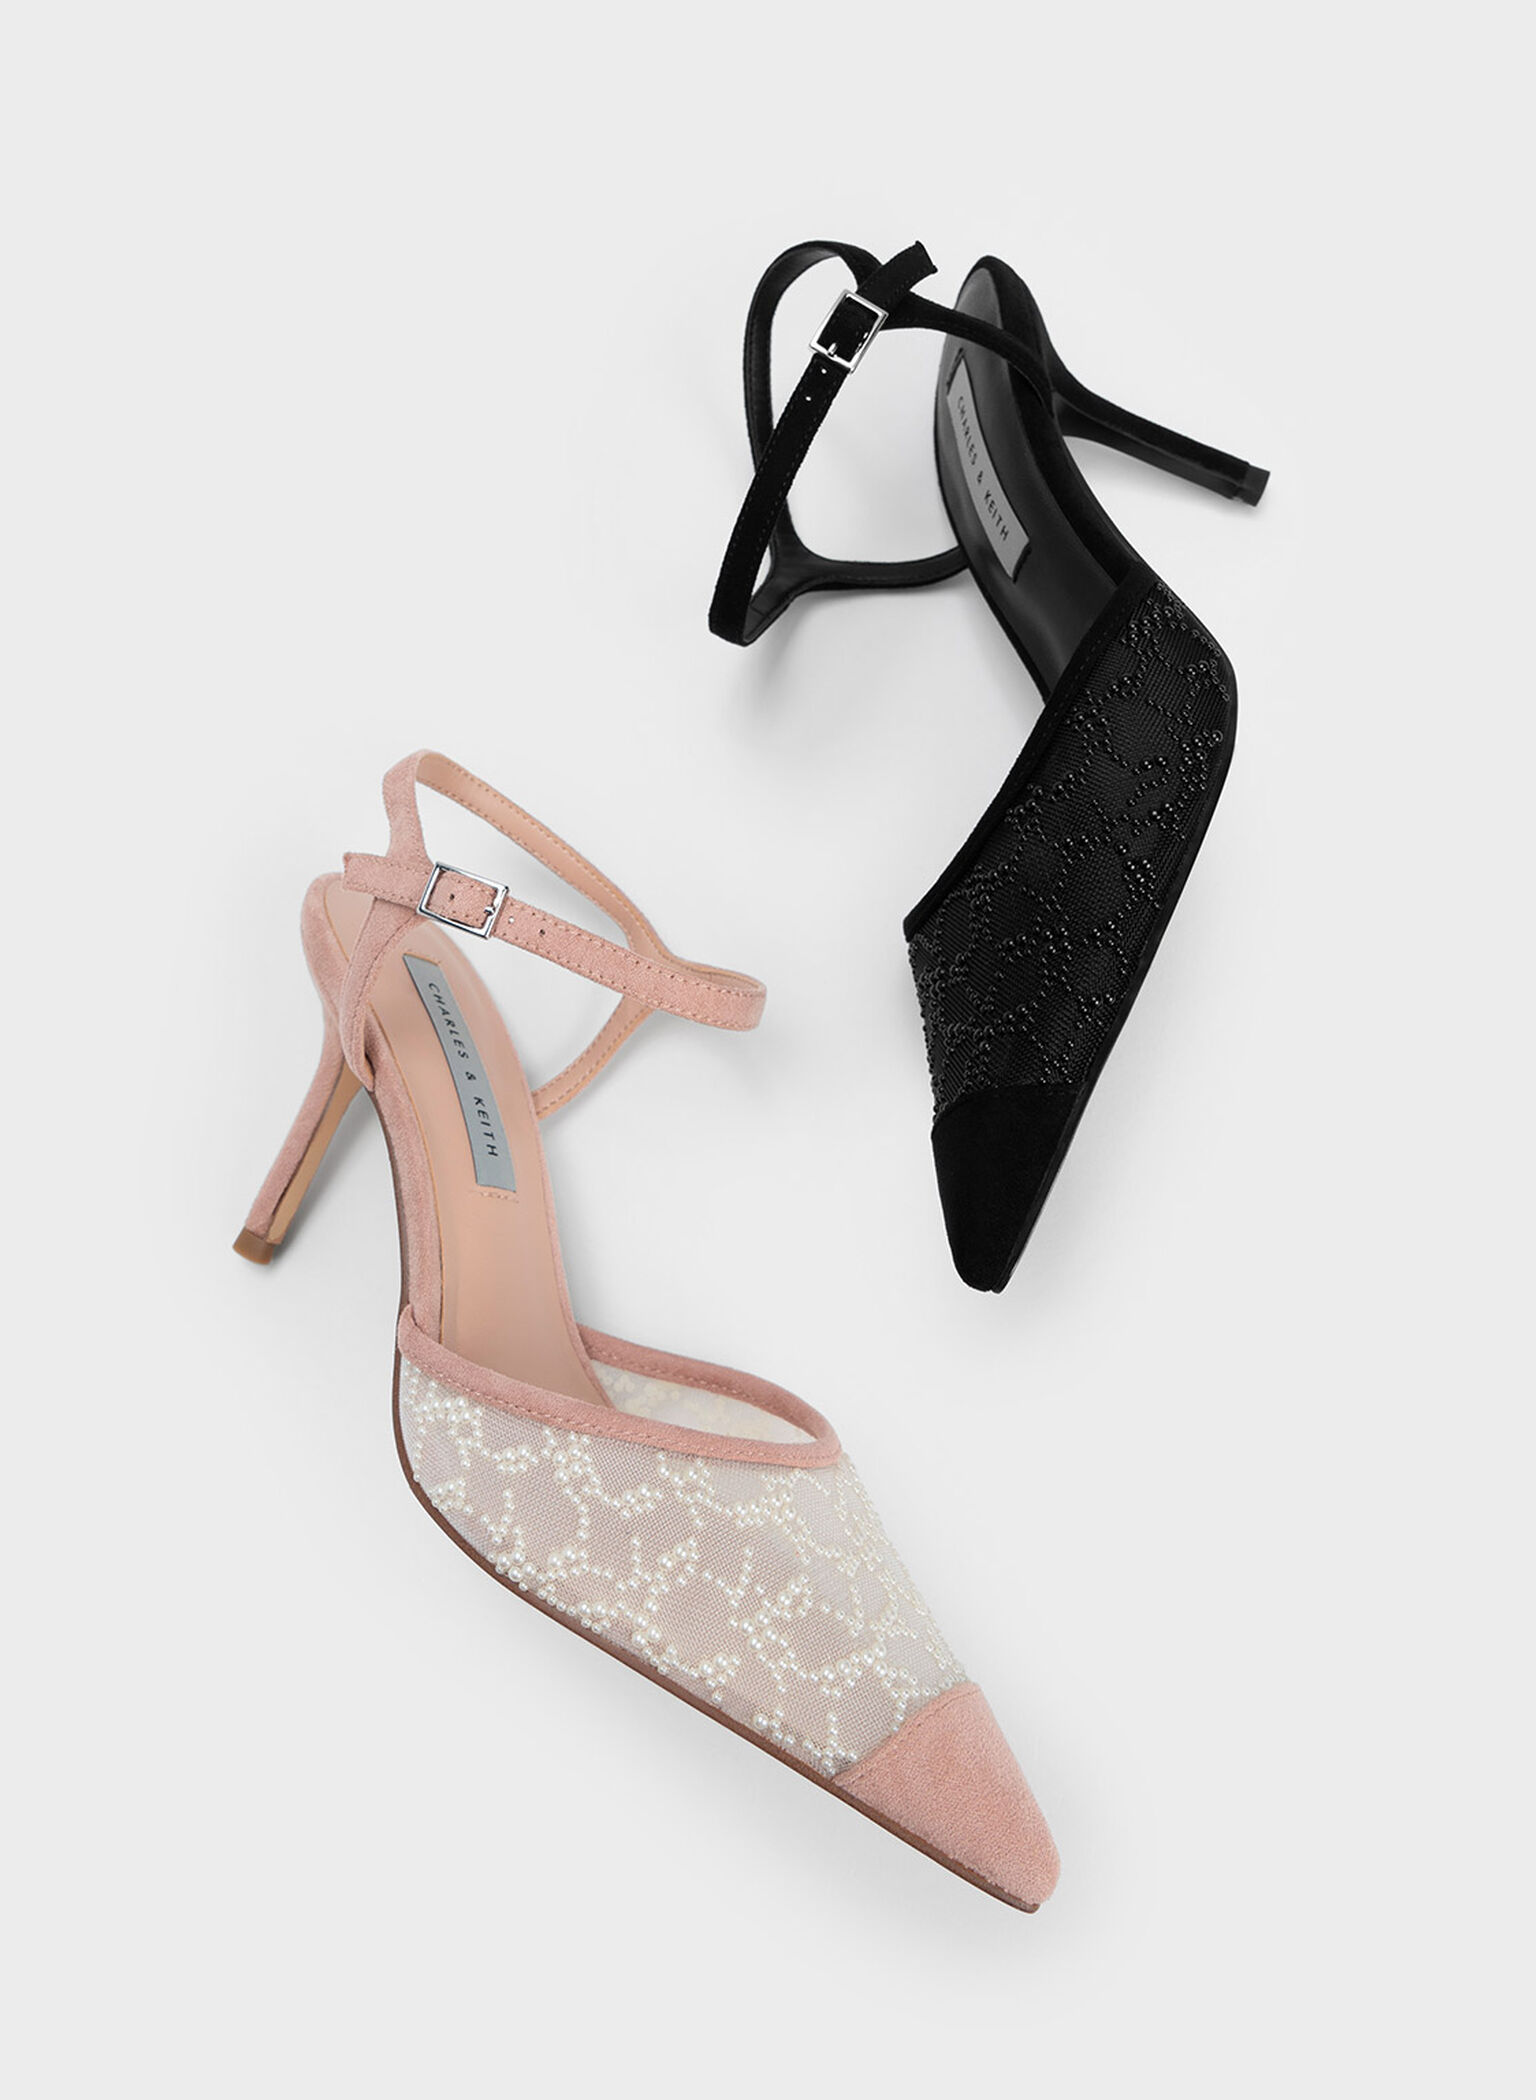 Beaded Mesh Ankle Strap Pumps, Nude, hi-res